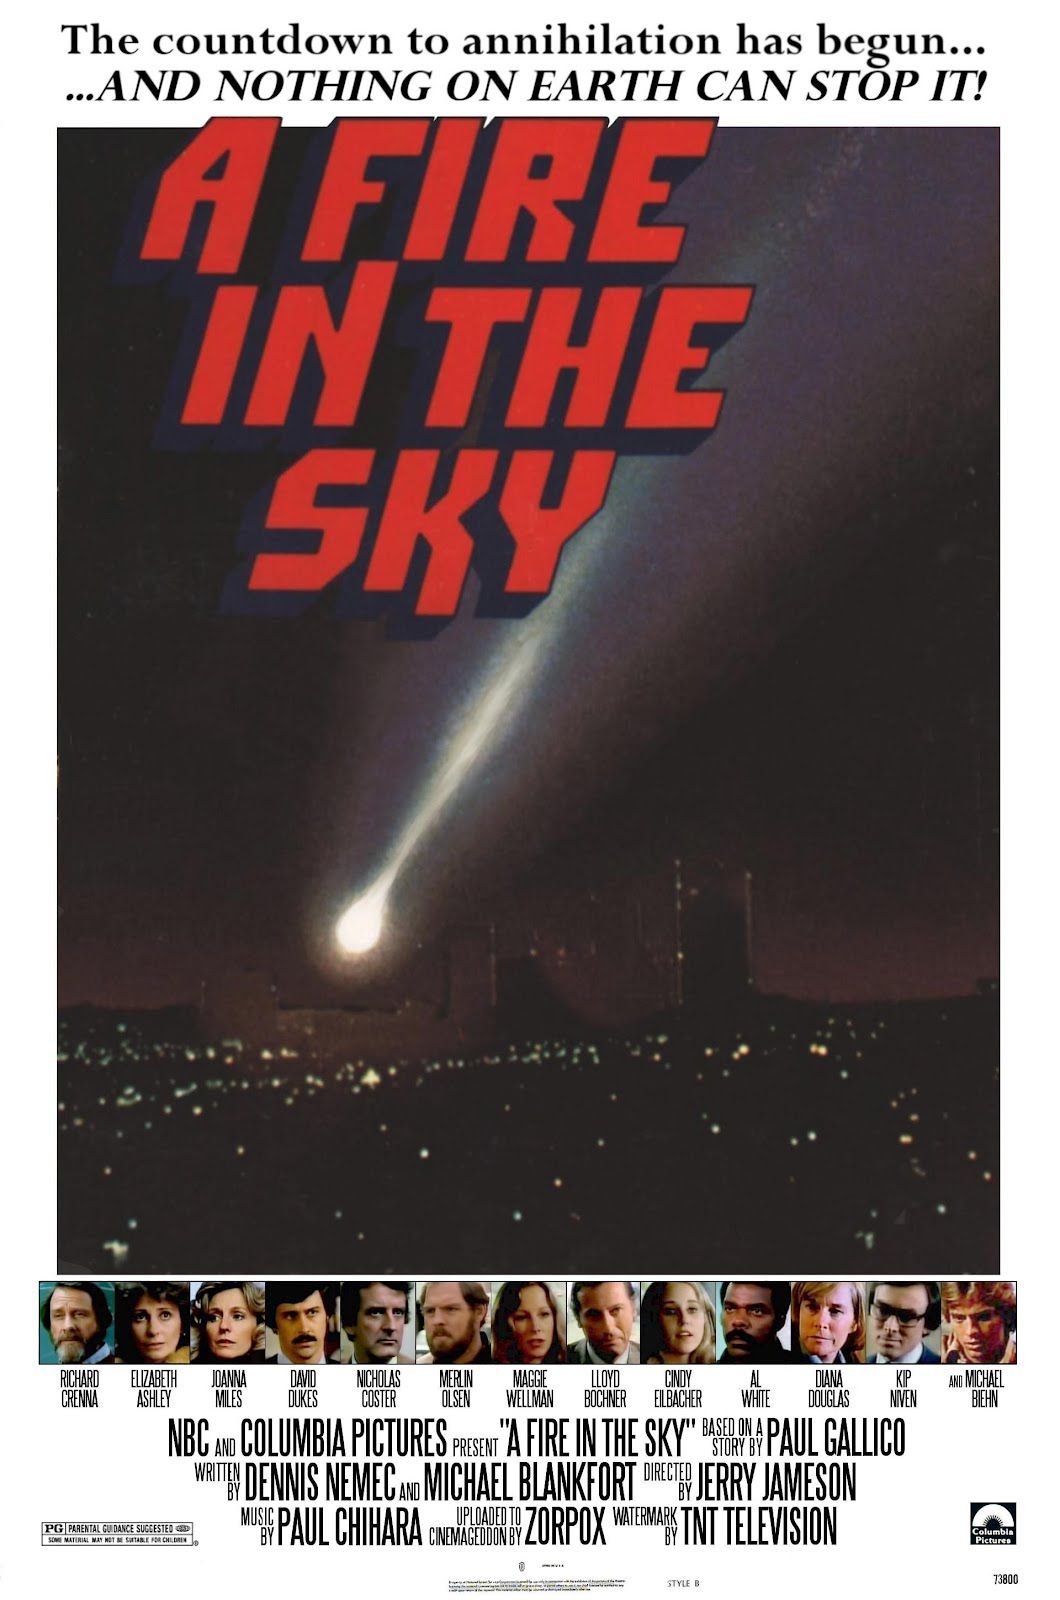 A Fire in the Sky - Promo Poster
Keywords: ;media_poster